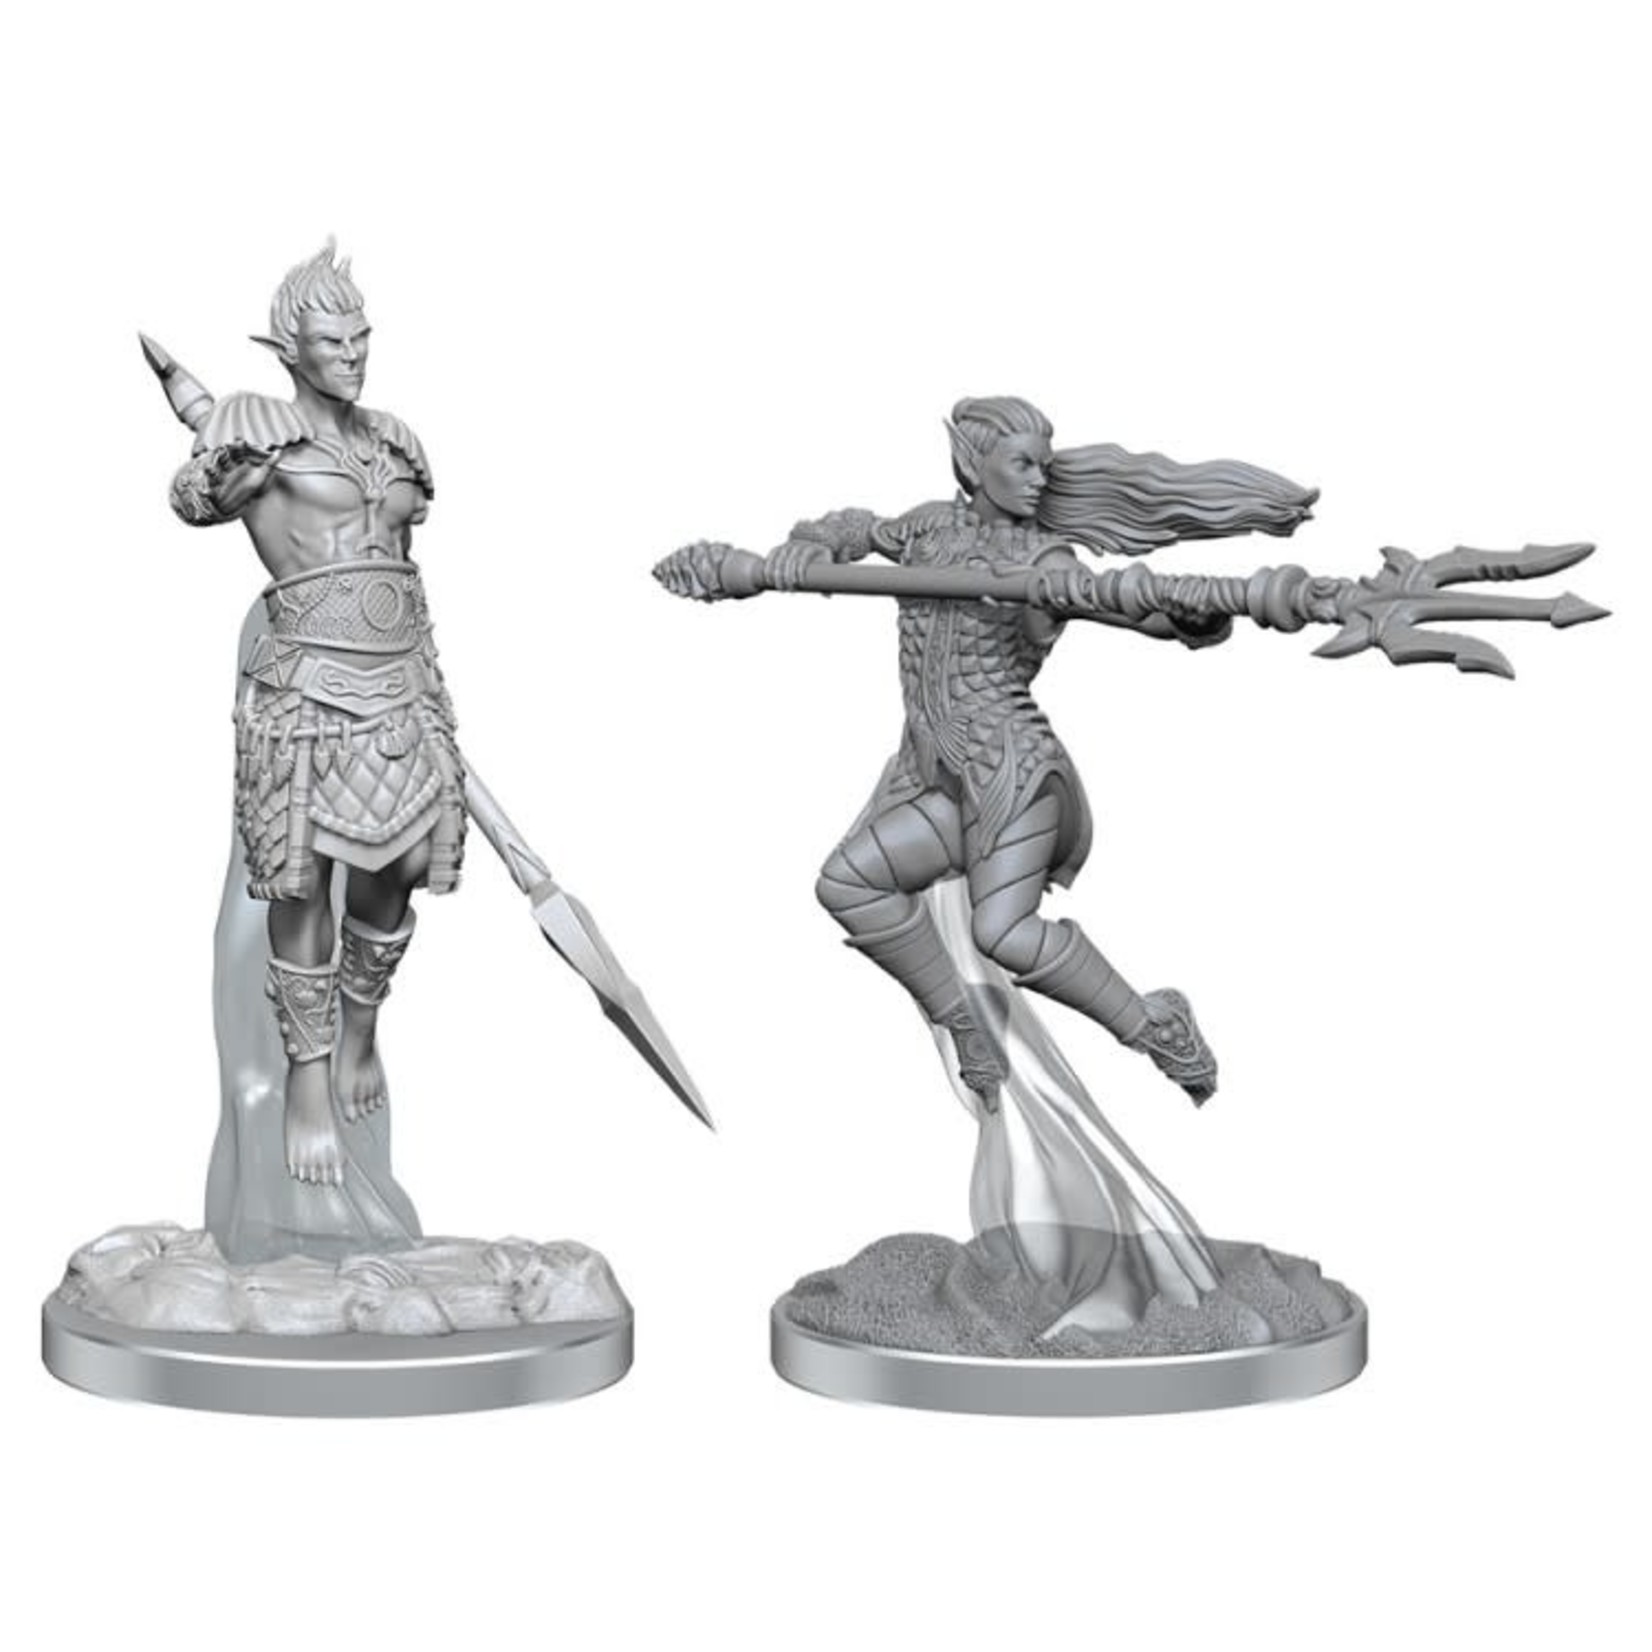 WizKids Dungeons and Dragons Nolzur's Marvelous Minis Sea Elf Fighters